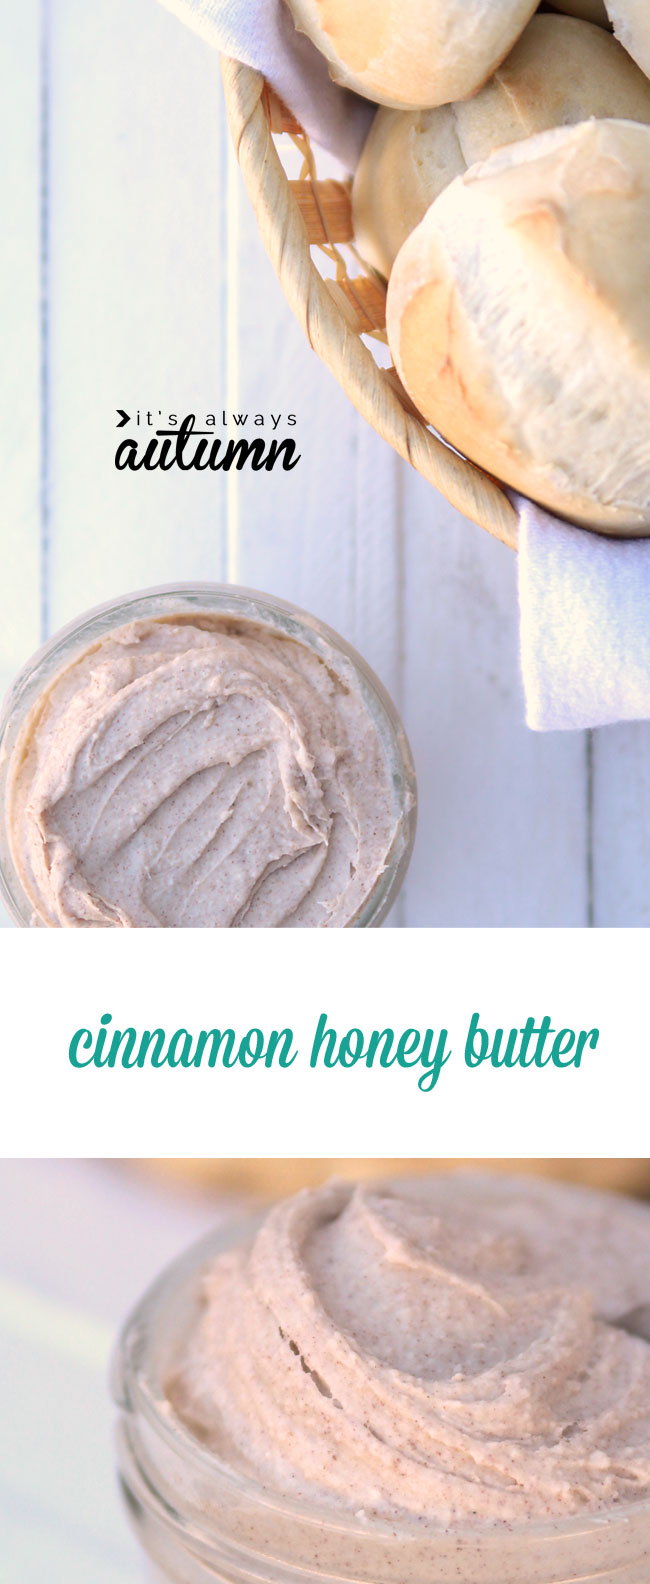 homemade cinnamon honey butter with a basket of rolls